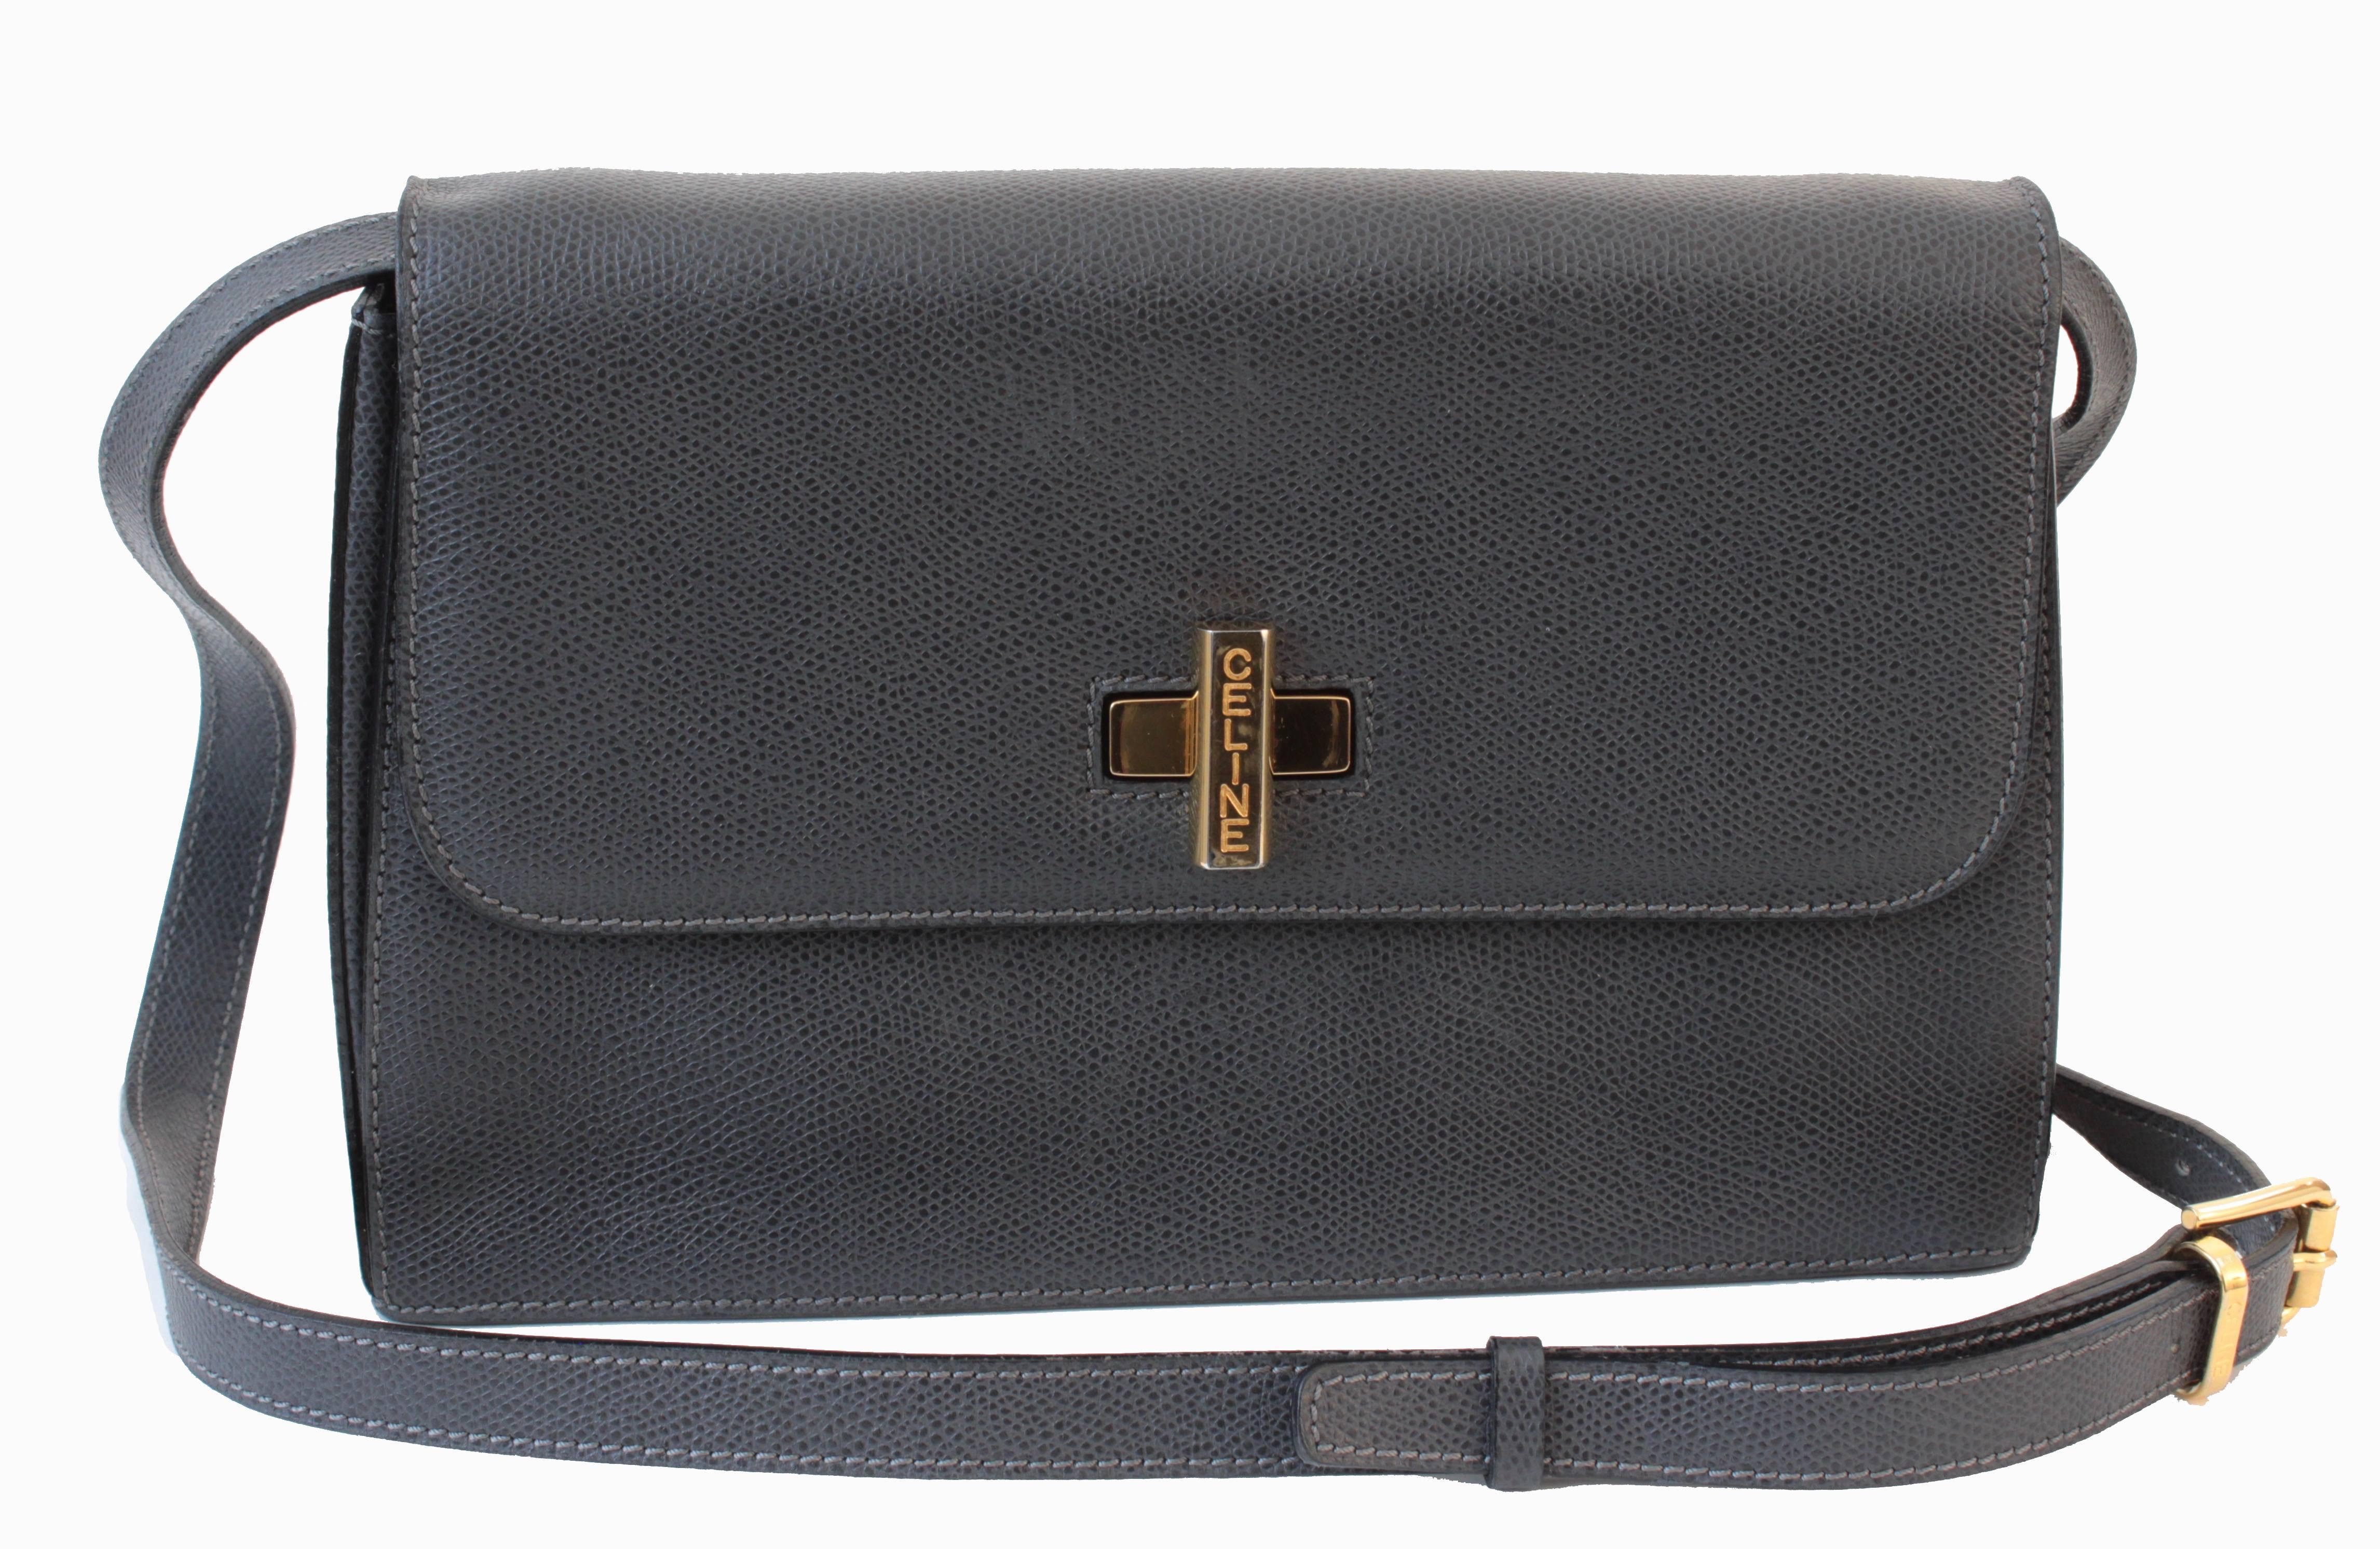 This leather shoulder bag was made by CELINE PARIS, likely in the early 1990s.  Made from a caviar textured leather in steel gray, it features a gold logo turn lock fastener, an adjustable shoulder strap, and accordion style pockets inside, all